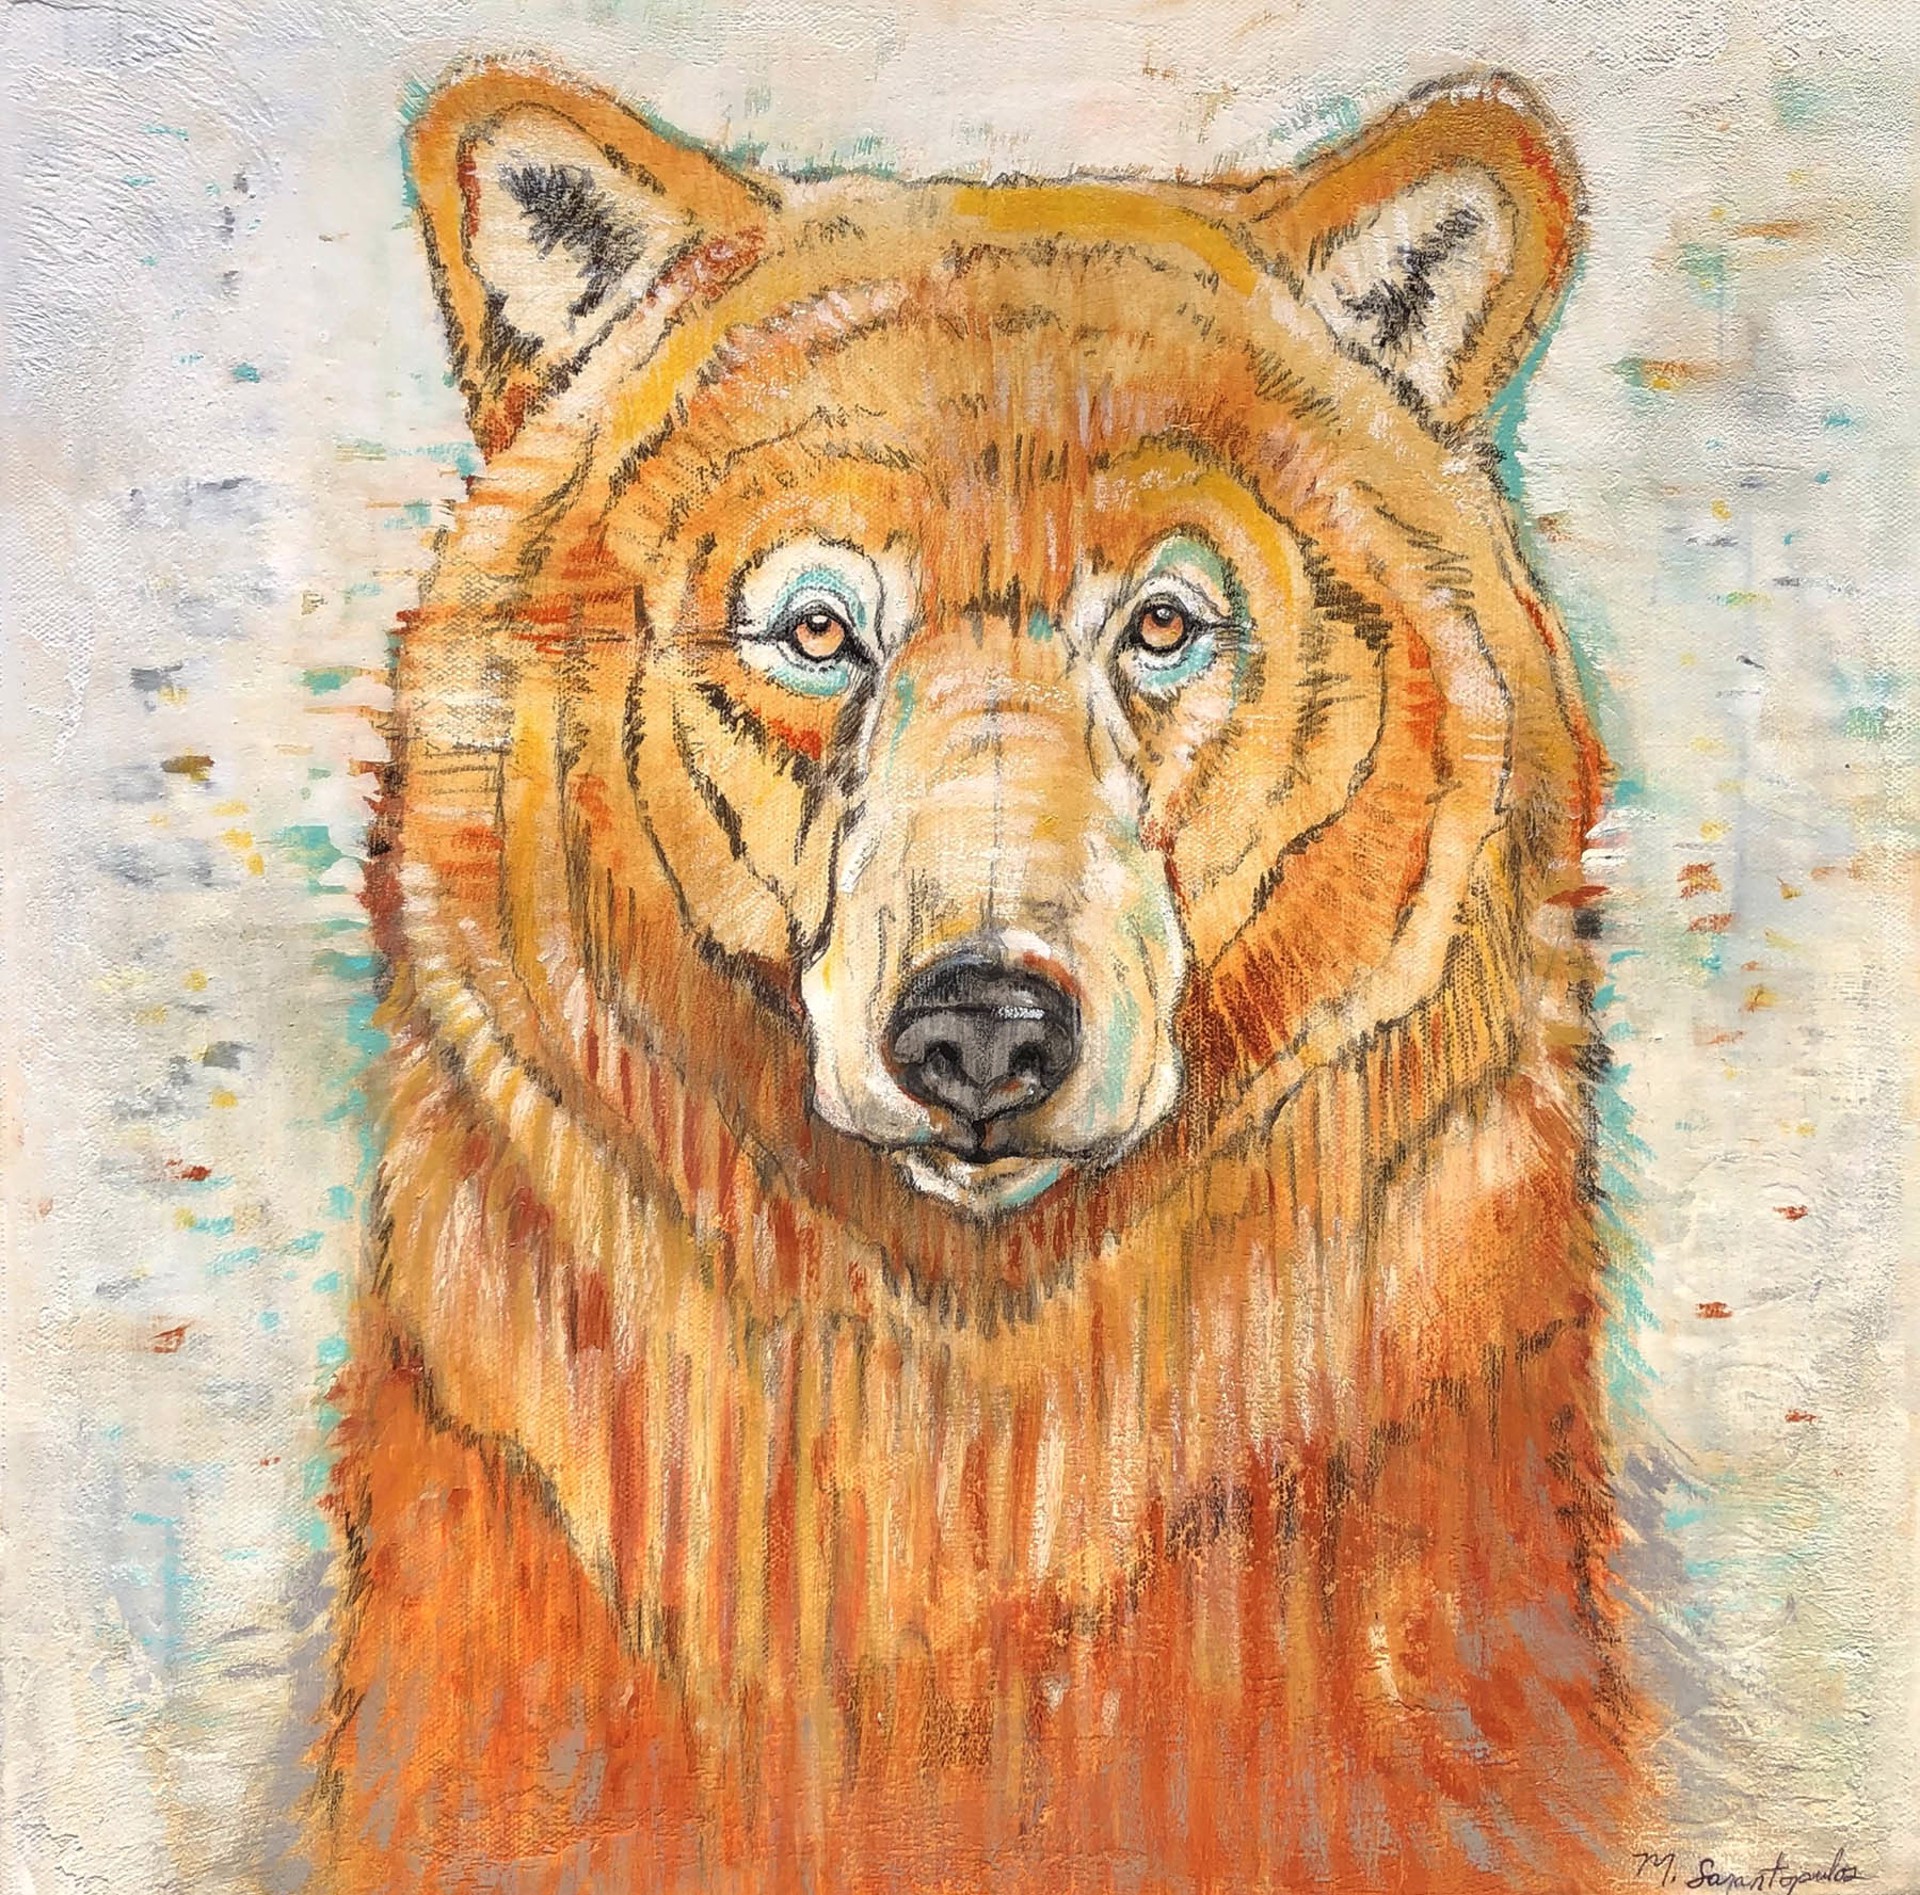 Original Mixed Media Painting Featuring A Bear Portrait In Orange Over Abstract Background